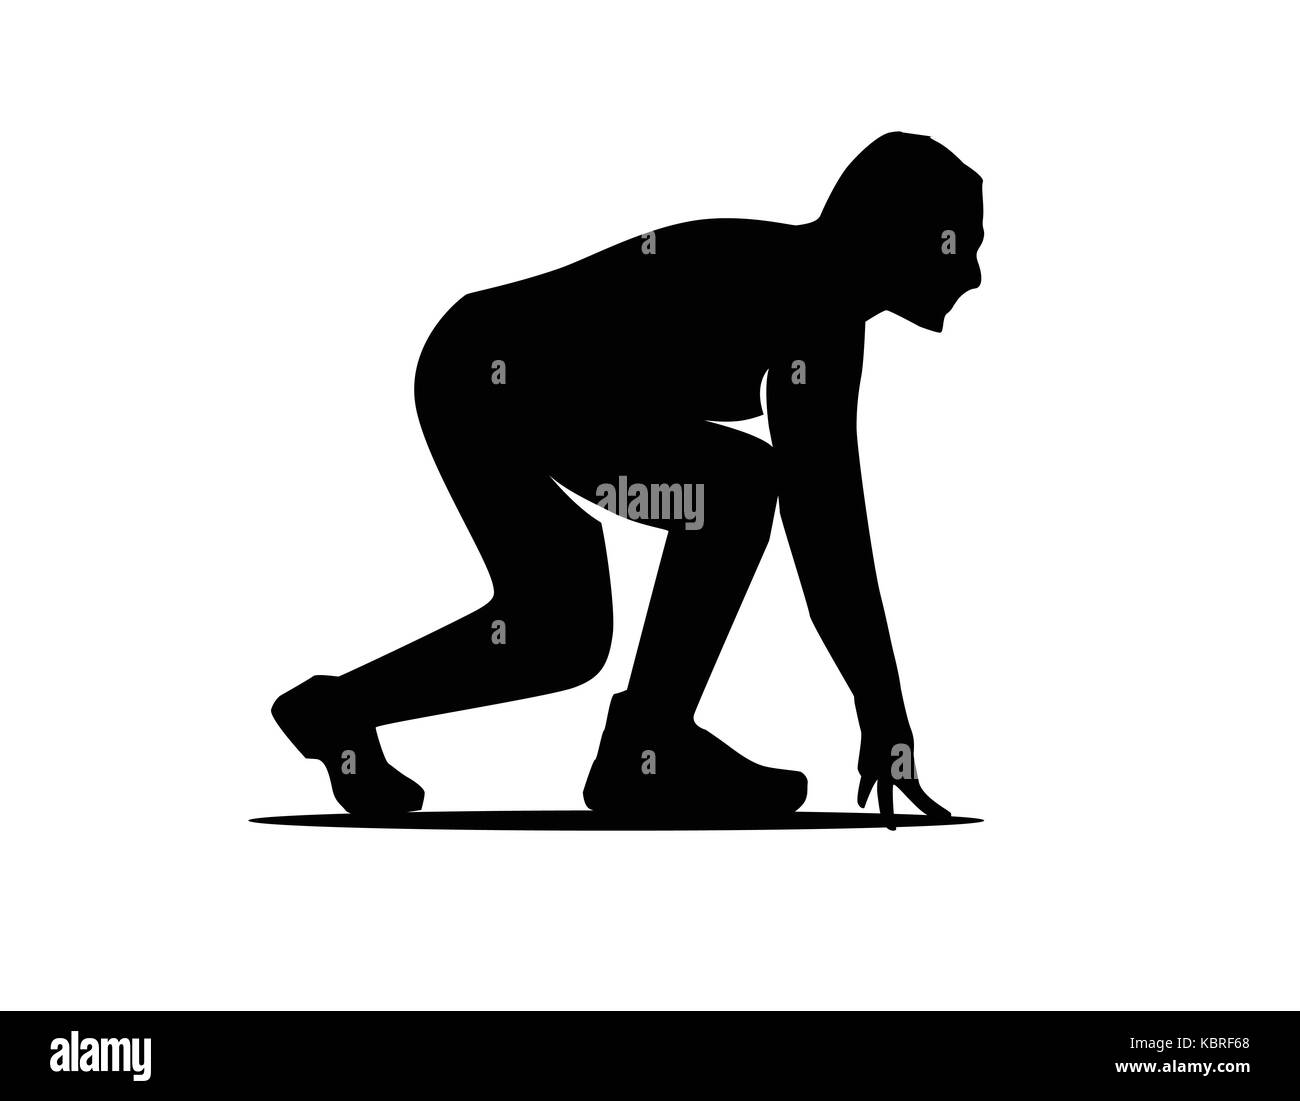 athlete start to run silhouette, person getting ready to run, silhouette design, isolated on white background. Stock Vector